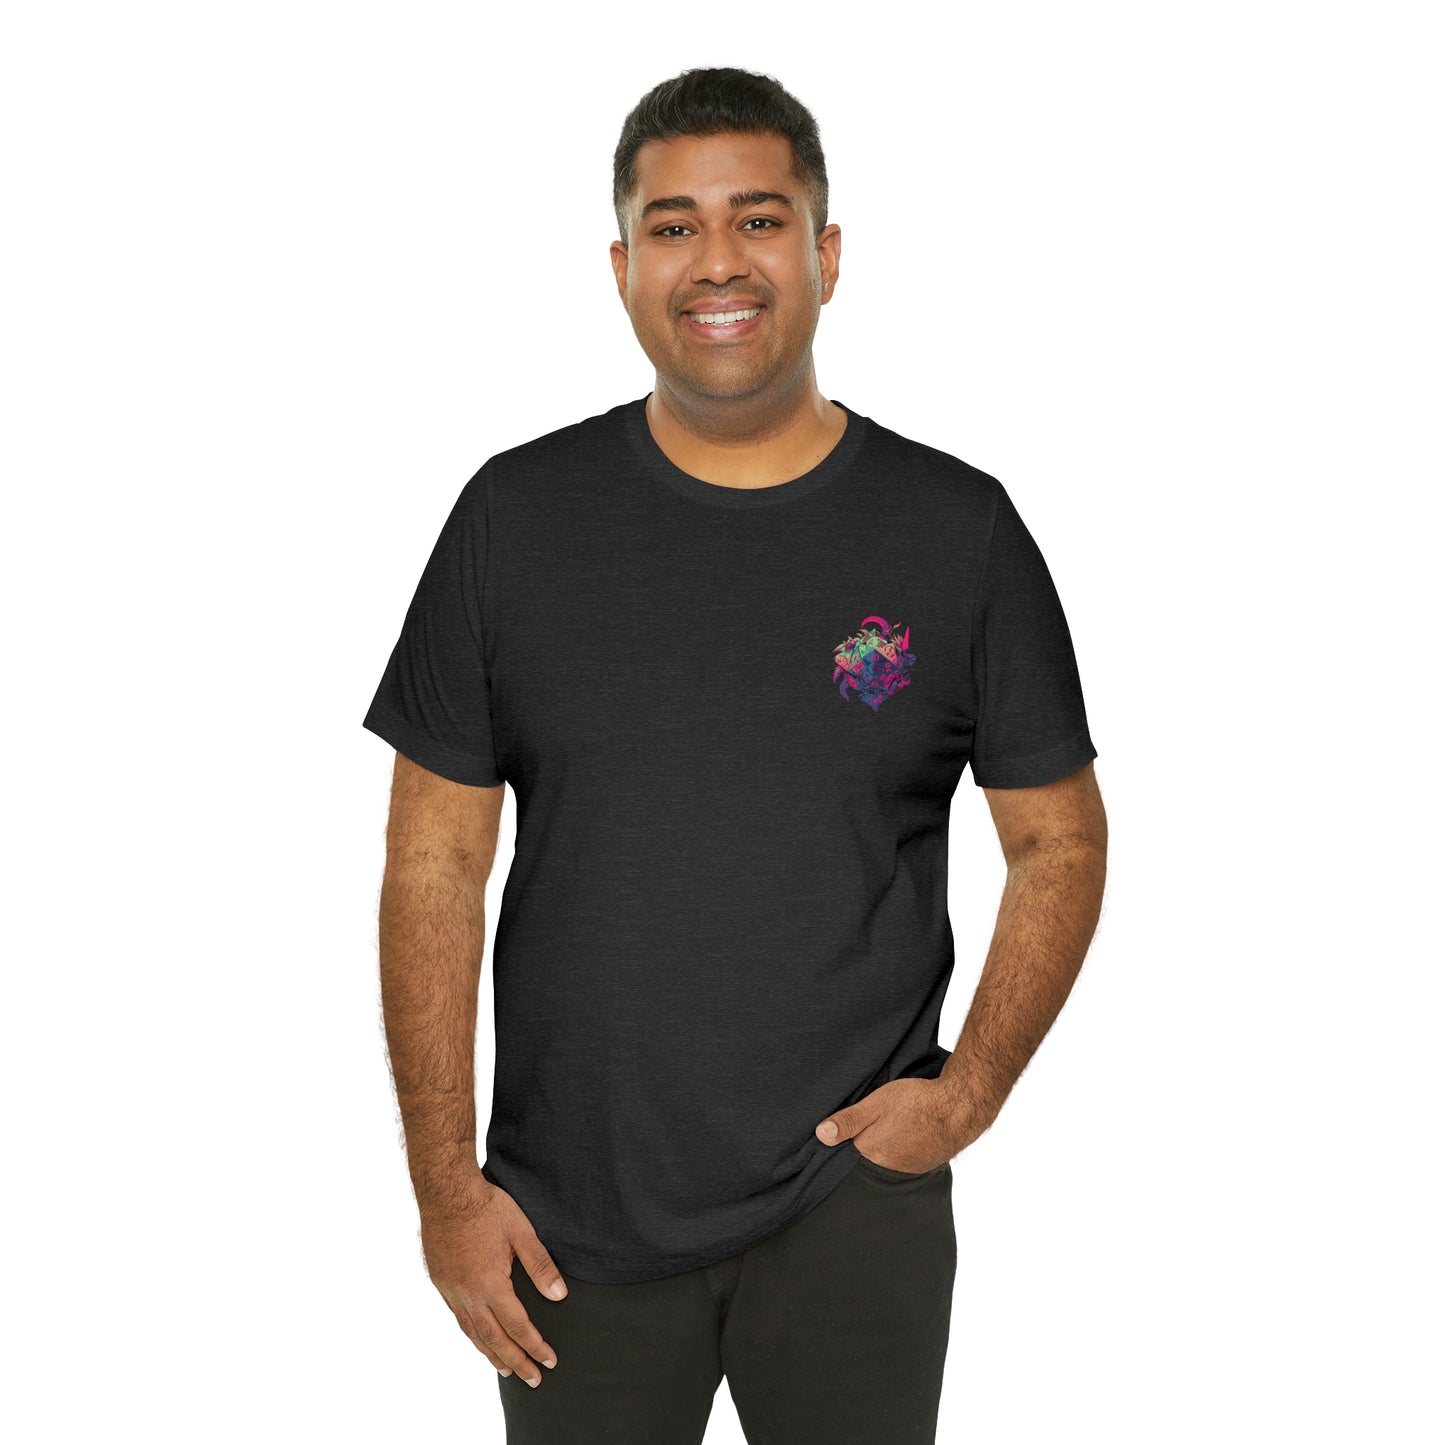 dark-grey-heather-quest-thread-tee-shirt-with-small-colorful-dice-in-pink-jungle-on-chest